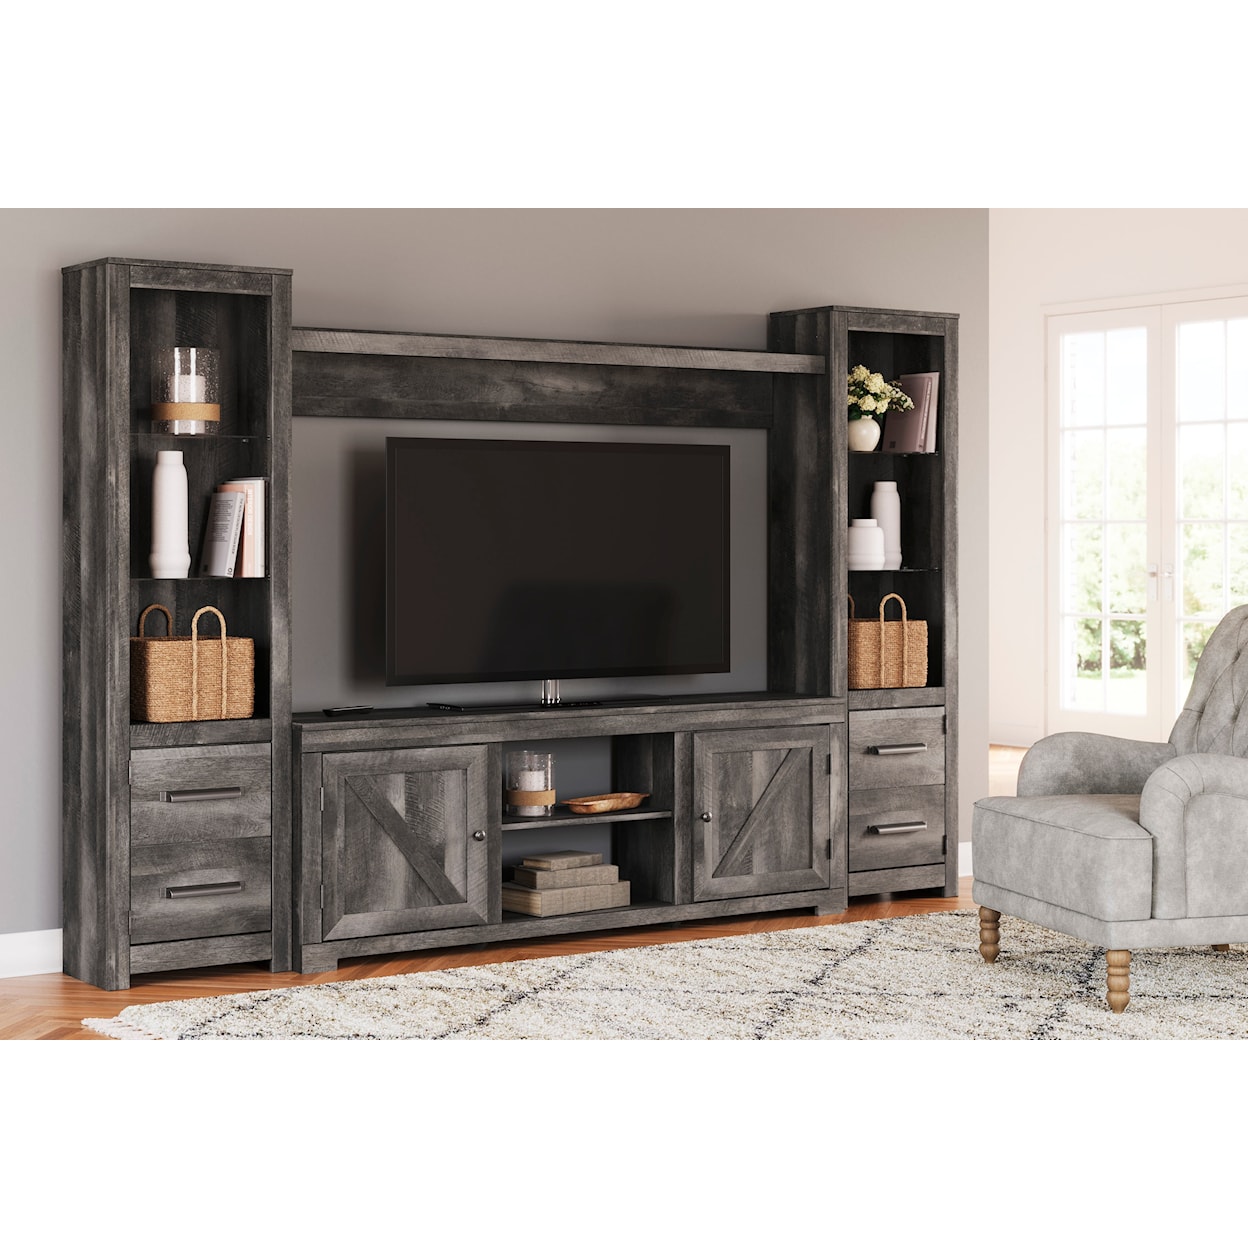 Signature Design by Ashley Wynnlow Entertainment Center with Pier Shelving